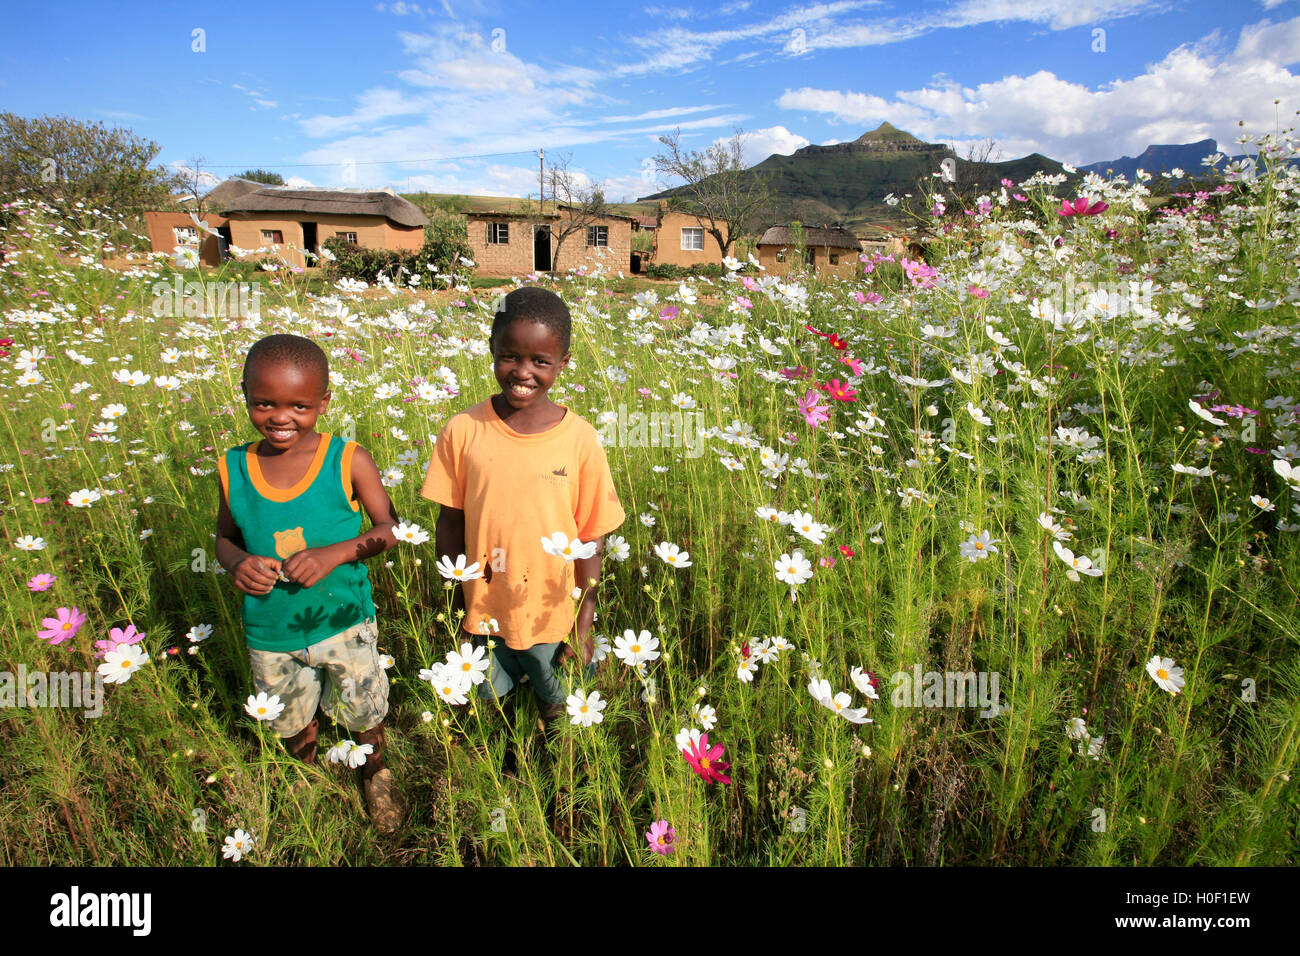 Two smiling children standing in a field of cosmos near Bergville Stock Photo